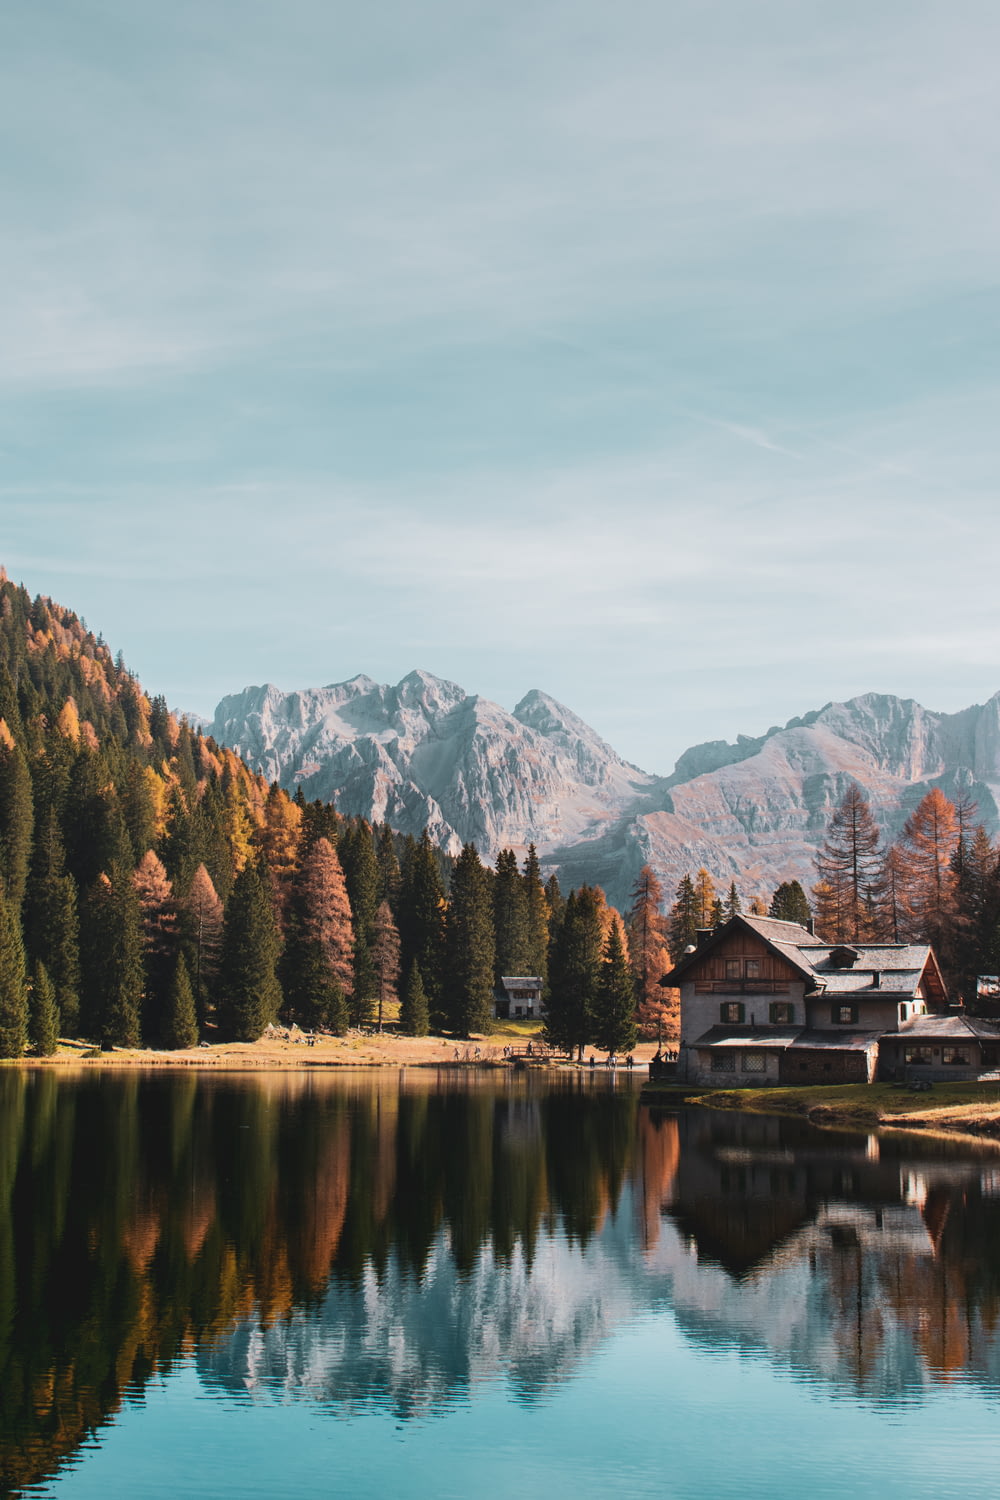 a house by a lake with mountains in the background